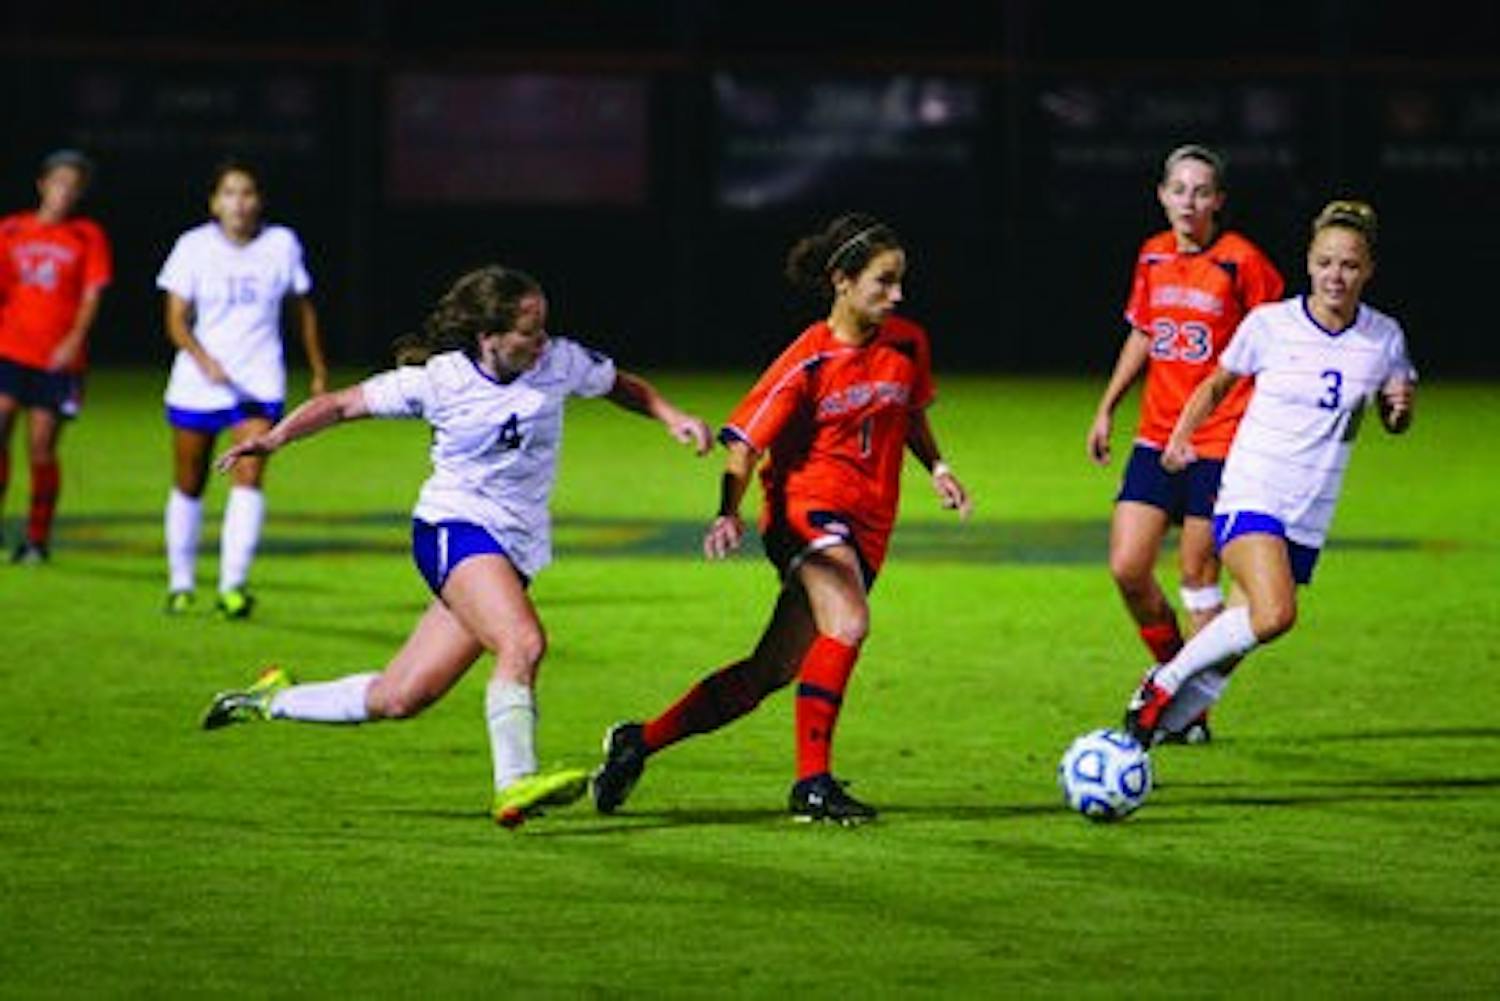 Junior midfielder Ana Cate sprints down the field, keeping possesion from LSU. (Rebecca Croomes / ASSISTANT PHOTO EDITOR)